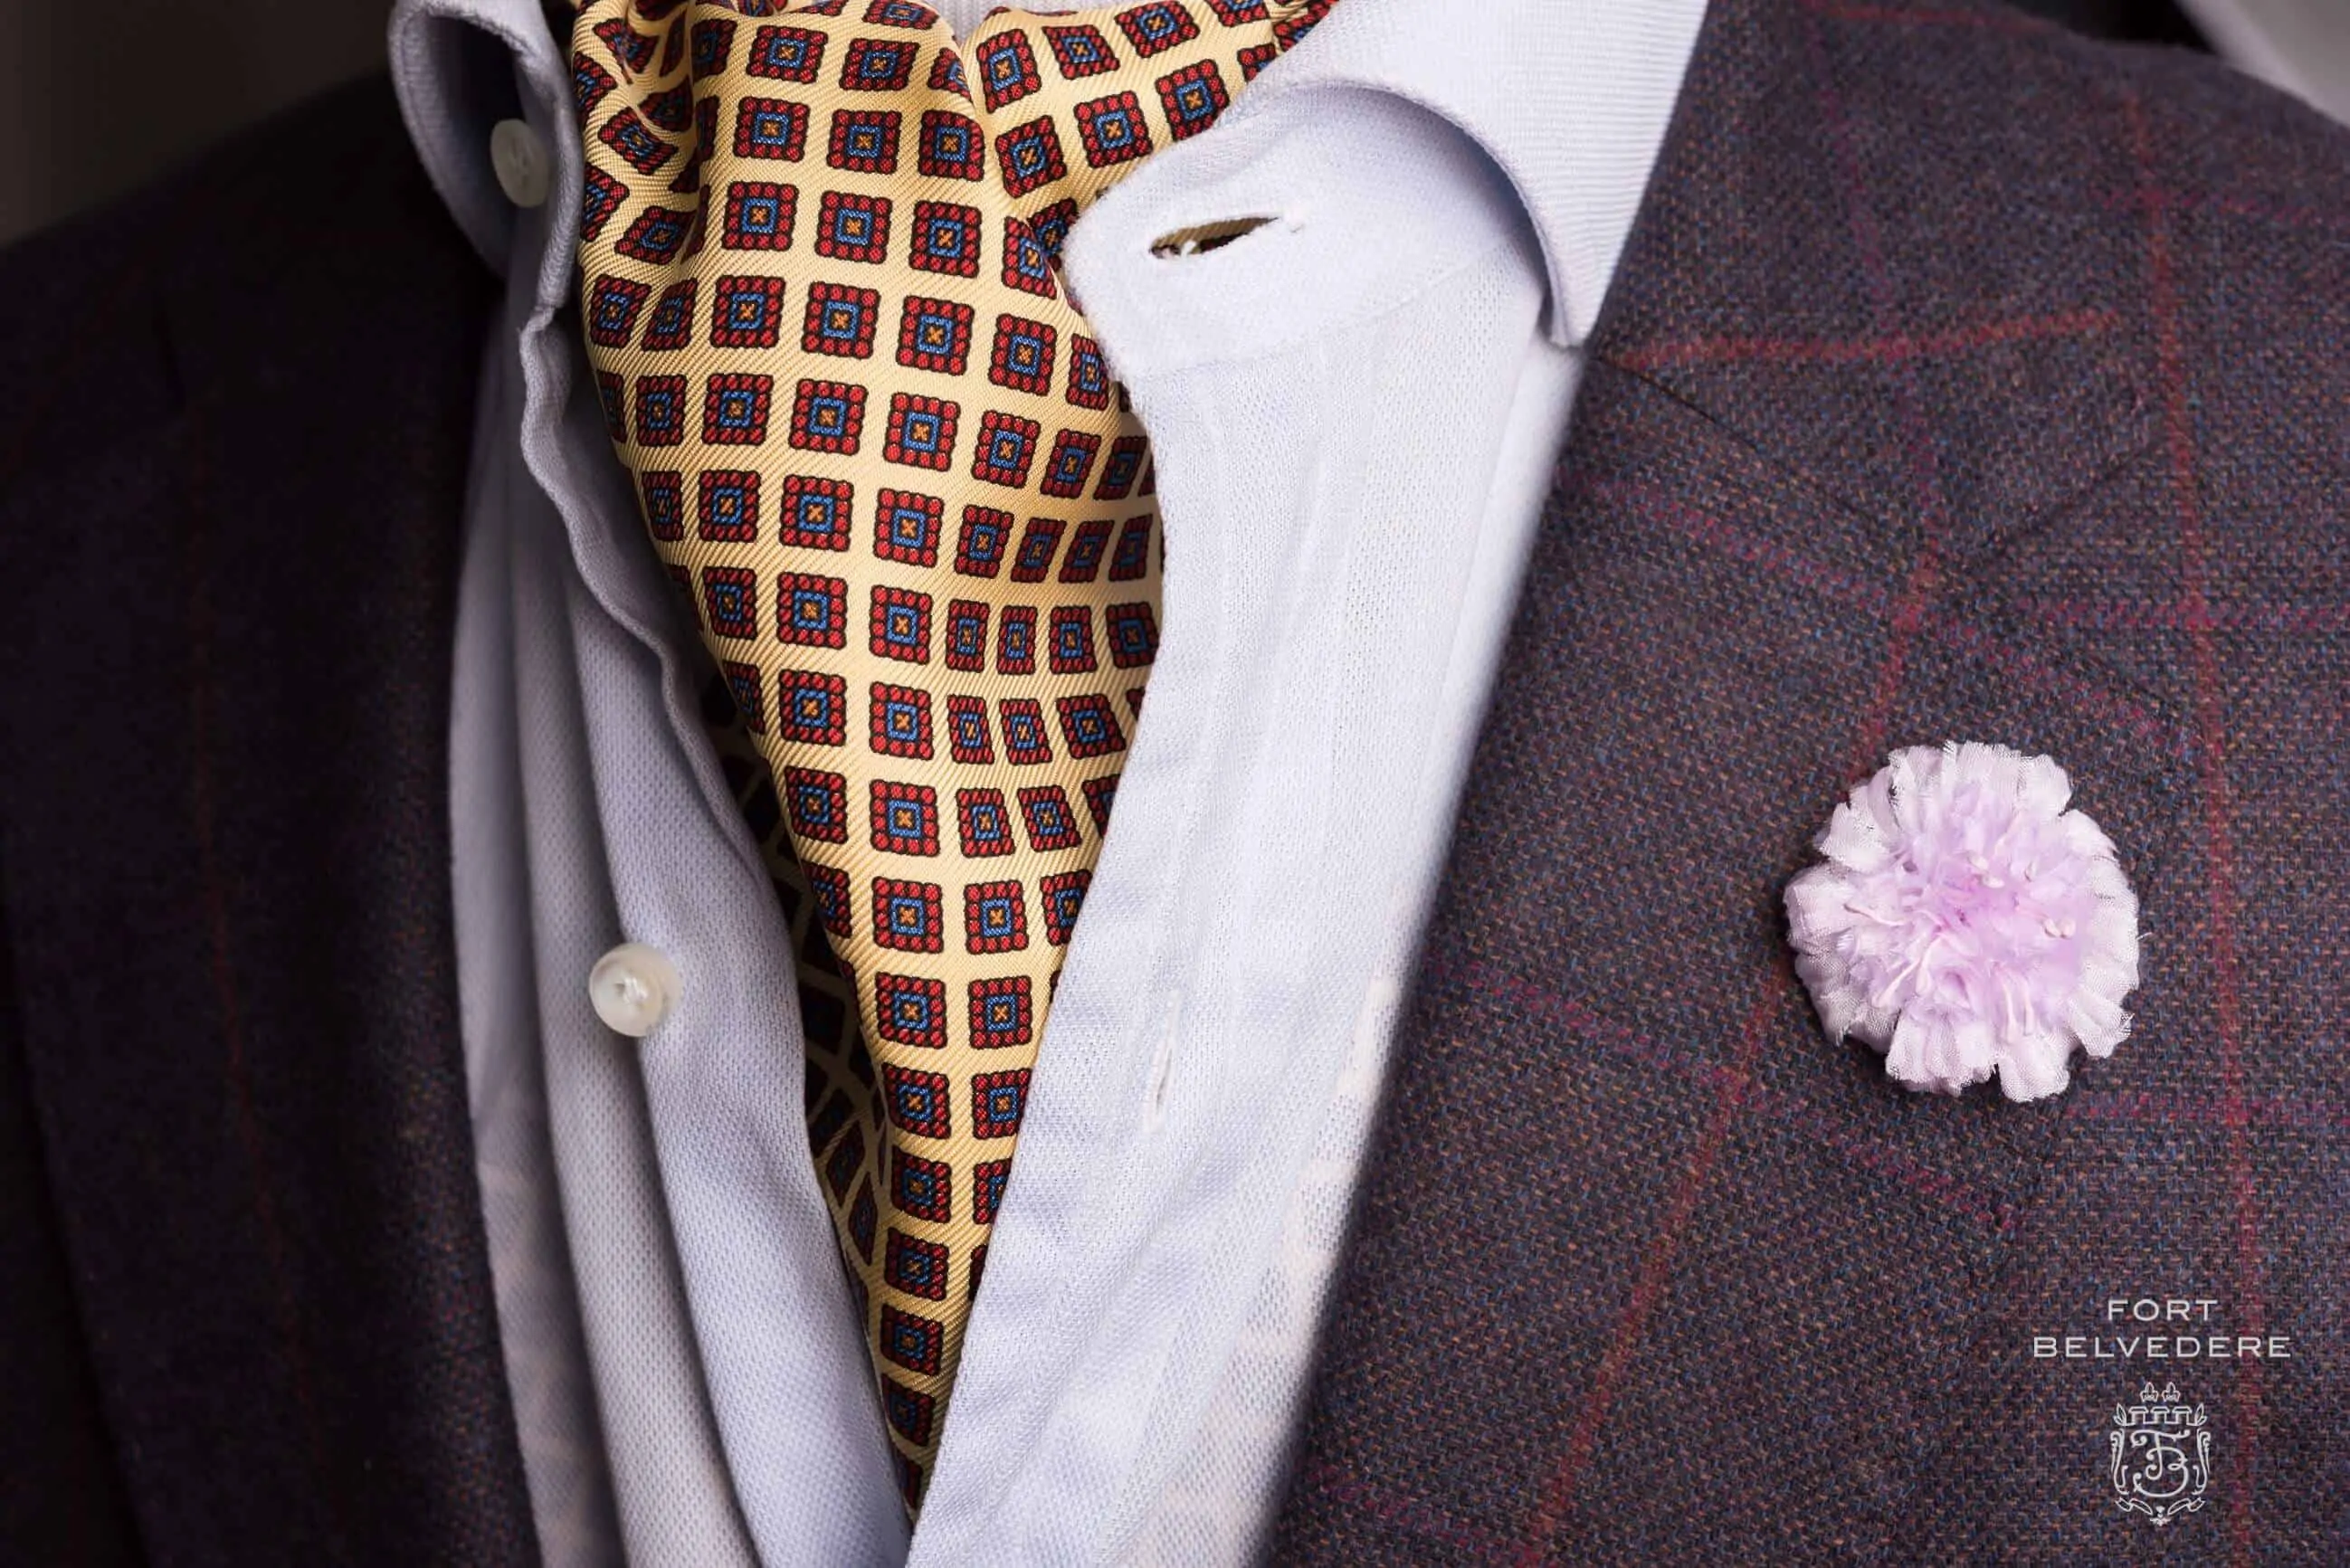 Cravat Vs Ascot: What Is The Difference? – Croom & Flood